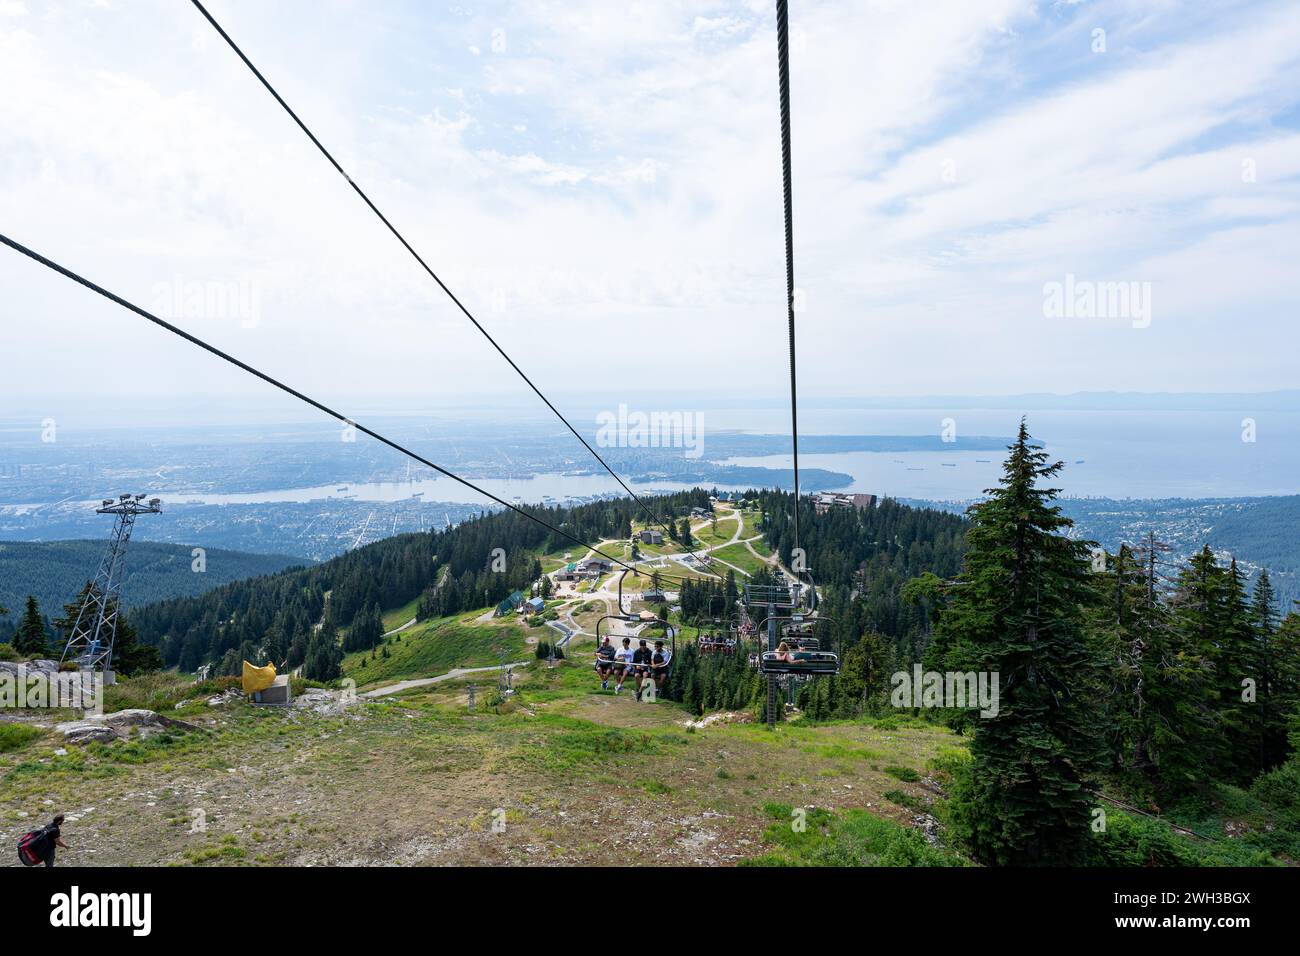 The view from the Grouse Mountain chairlift with Vancouver in the distant background. Stock Photo